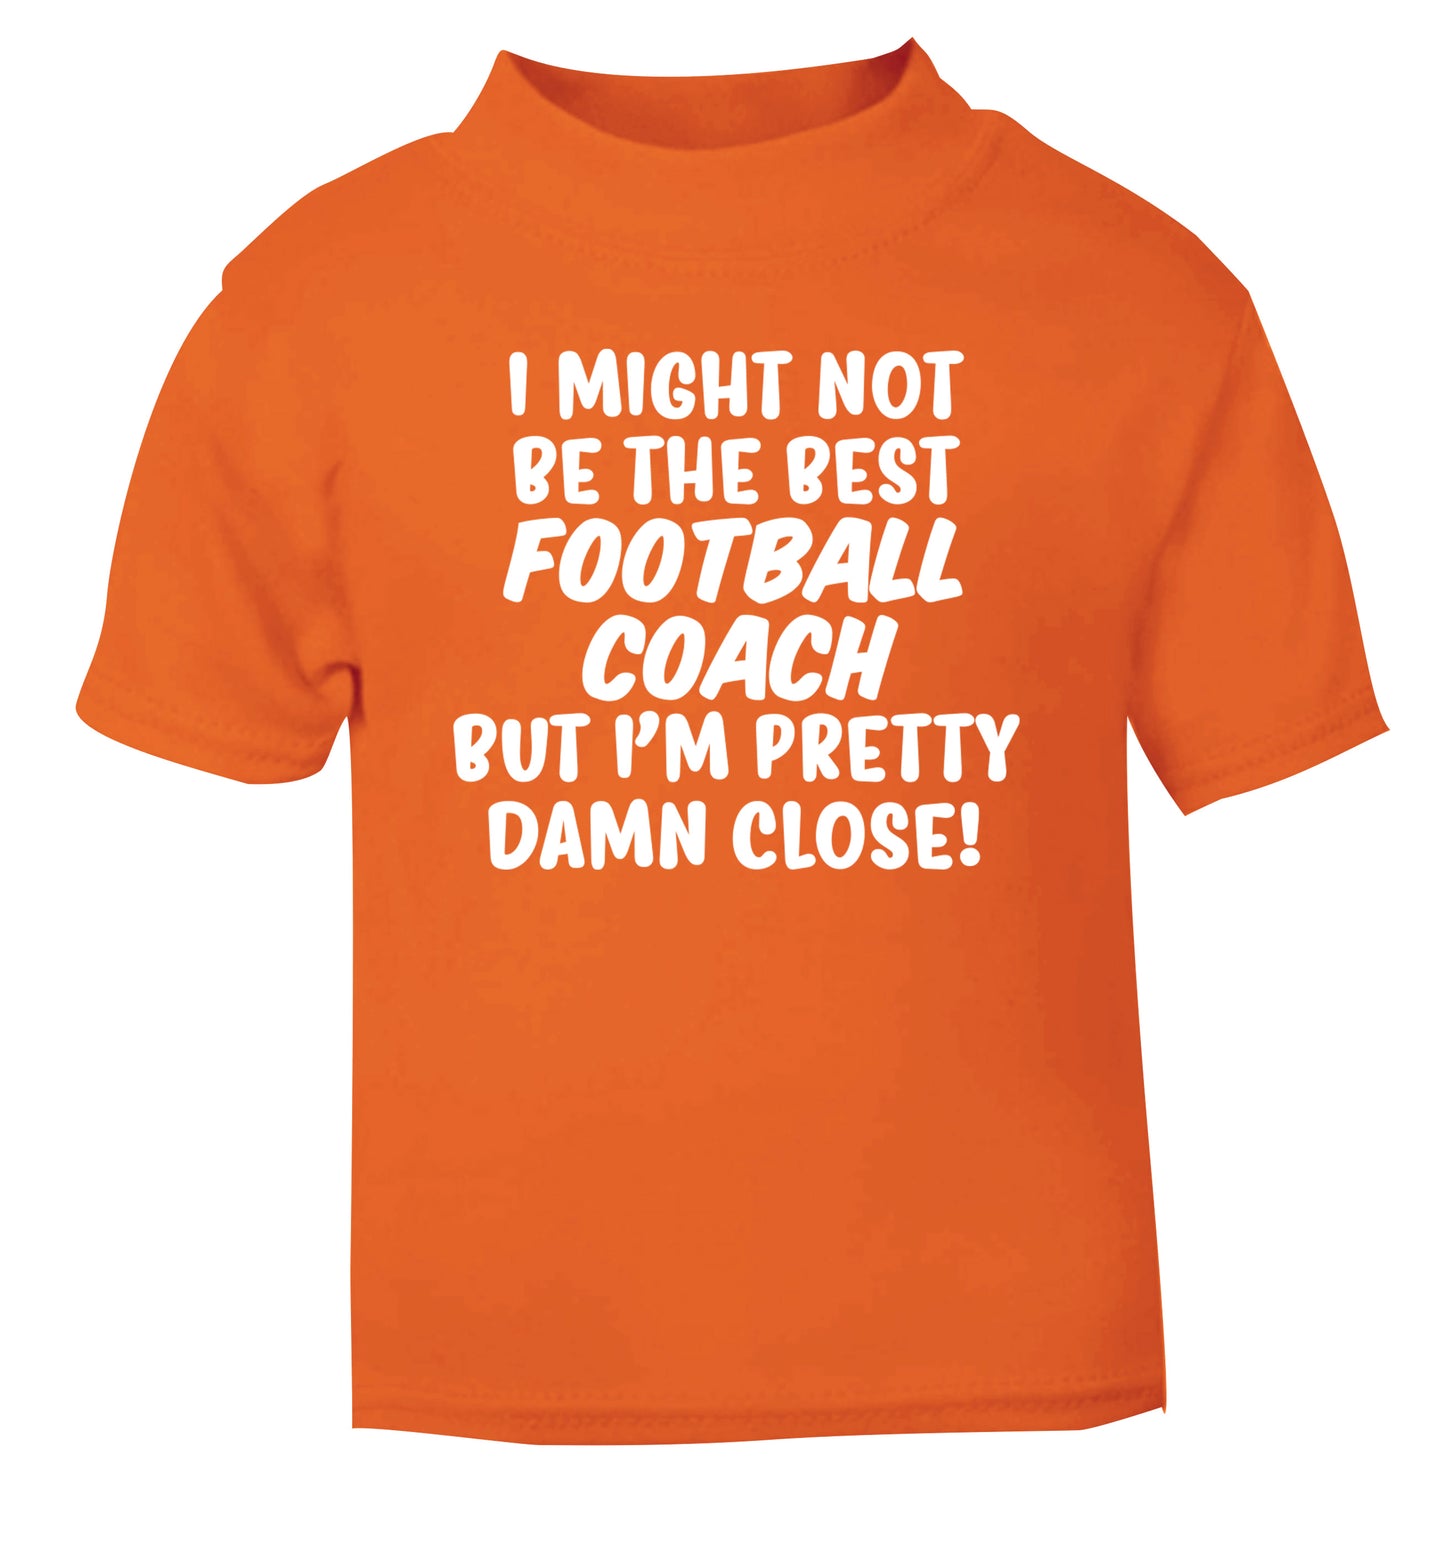 I might not be the best football coach but I'm pretty close! orange Baby Toddler Tshirt 2 Years